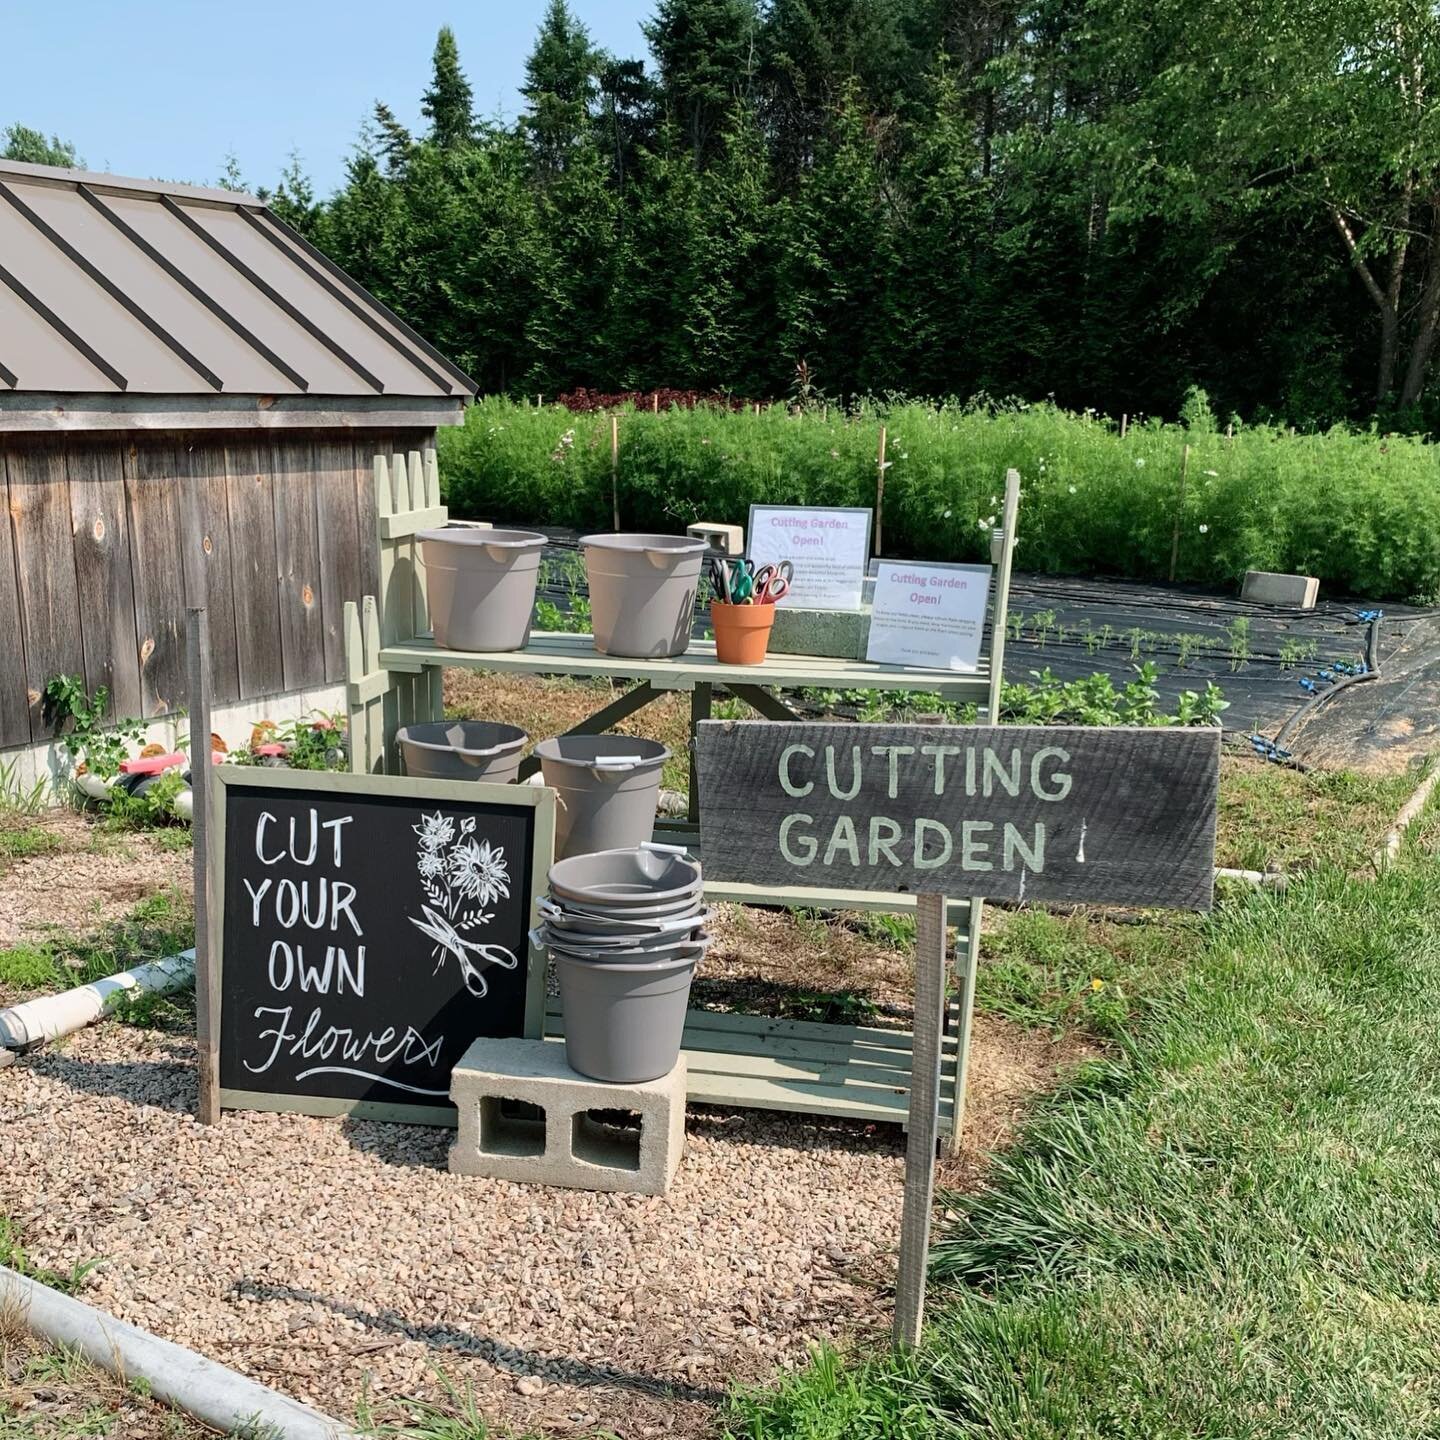 𝚕𝚎𝚝&rsquo;𝚜 𝚌𝚞𝚝 𝚝𝚘 𝚝𝚑𝚎 𝚌𝚑𝚊𝚜𝚎

Was checking out @thefarmersdaughter_ri yesterday around 3 and saw a sign that said FLOWER CUTTING.

Turns out they have an adorable area in the back (past the greenhouses) where flowers are blooming, I 